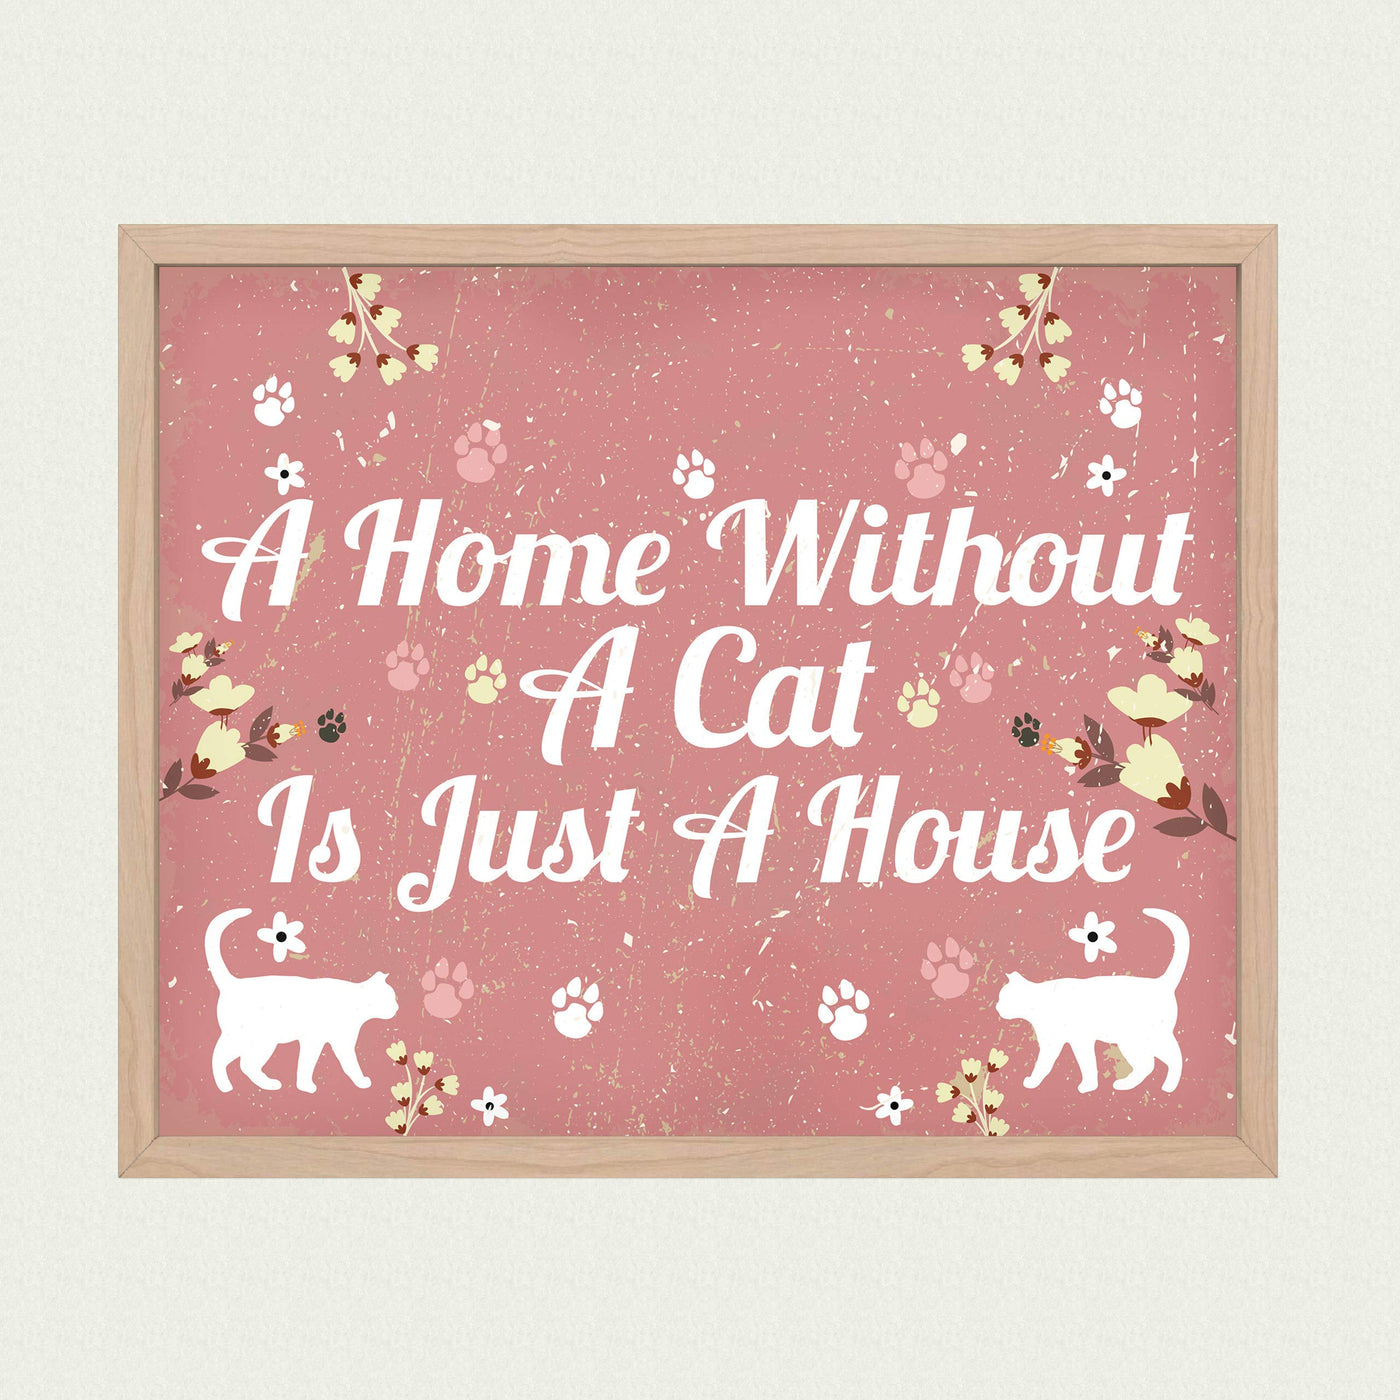 A Home Without a Cat Is Just a House Funny Pet Decor -10 x 8" Floral Typographic Wall Art Print-Ready to Frame. Humorous Cats Decor for Home-Office-Desk-Vet Clinic. Great Gift for Cat Lovers!